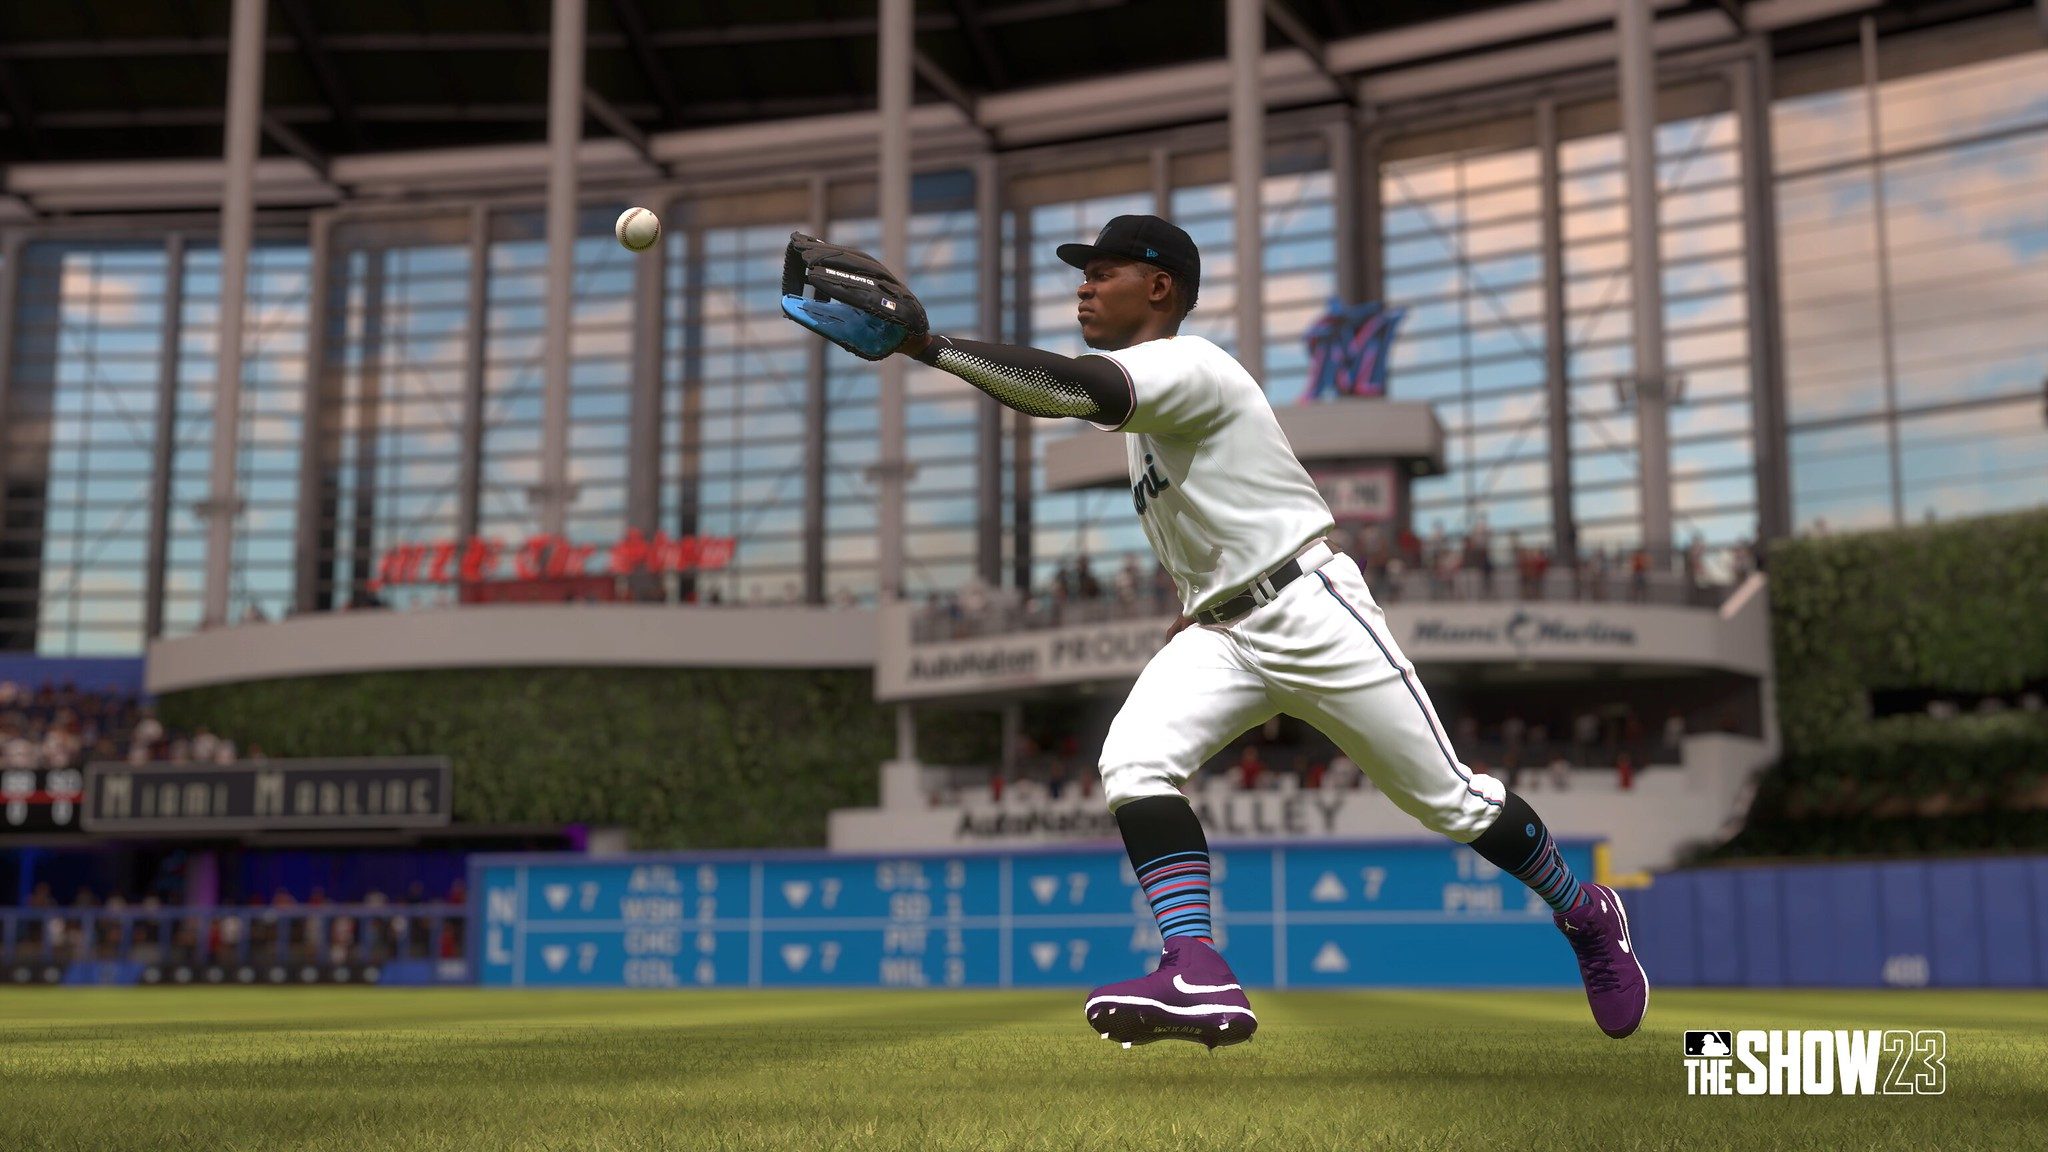 MLB The Show 23's gameplay features detailed